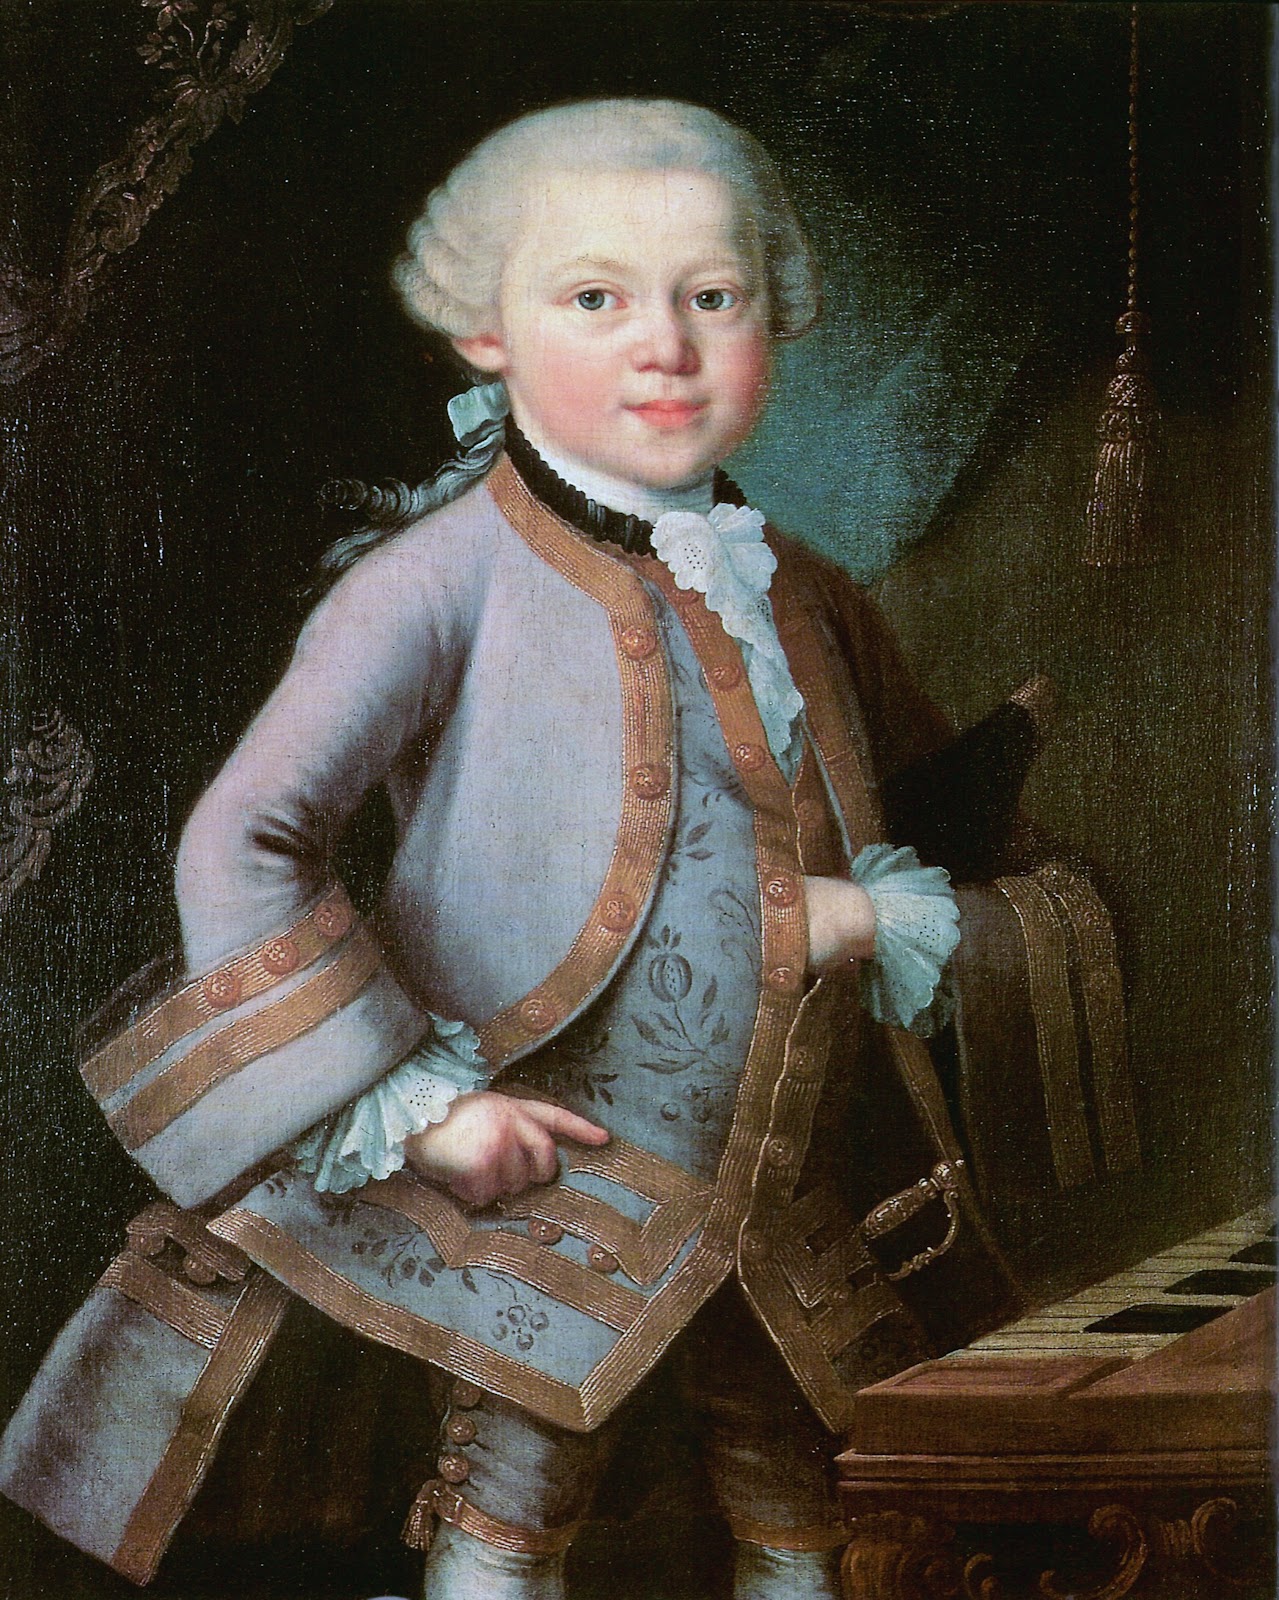 Piano concertos by Wolfgang Amadeus Mozart